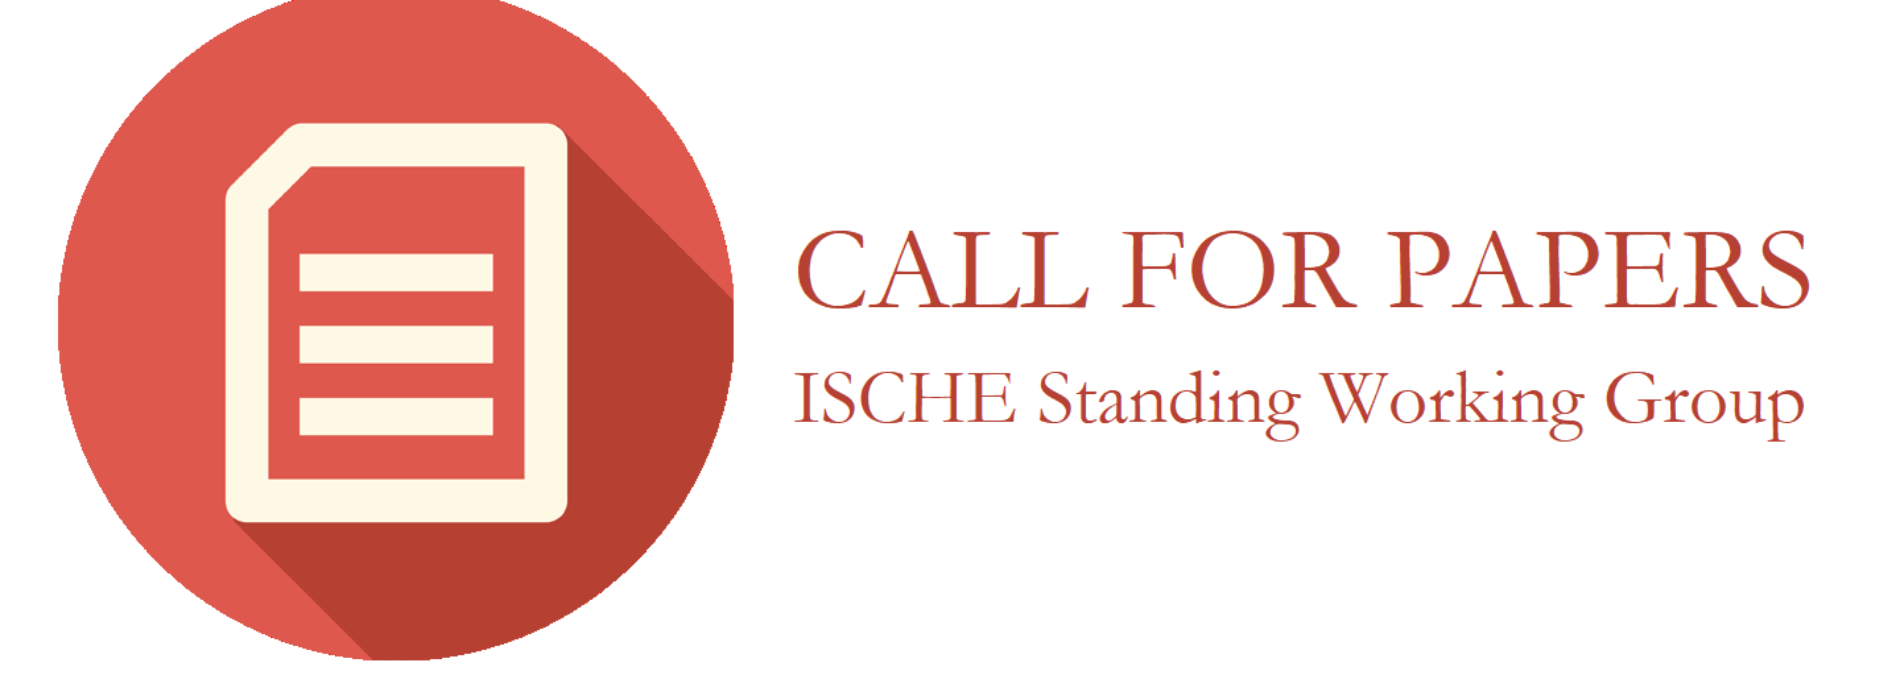 Migrants, migration and education SWG invites submissions for ISCHE 39 conference. Deadline: Jan. 31, 2017